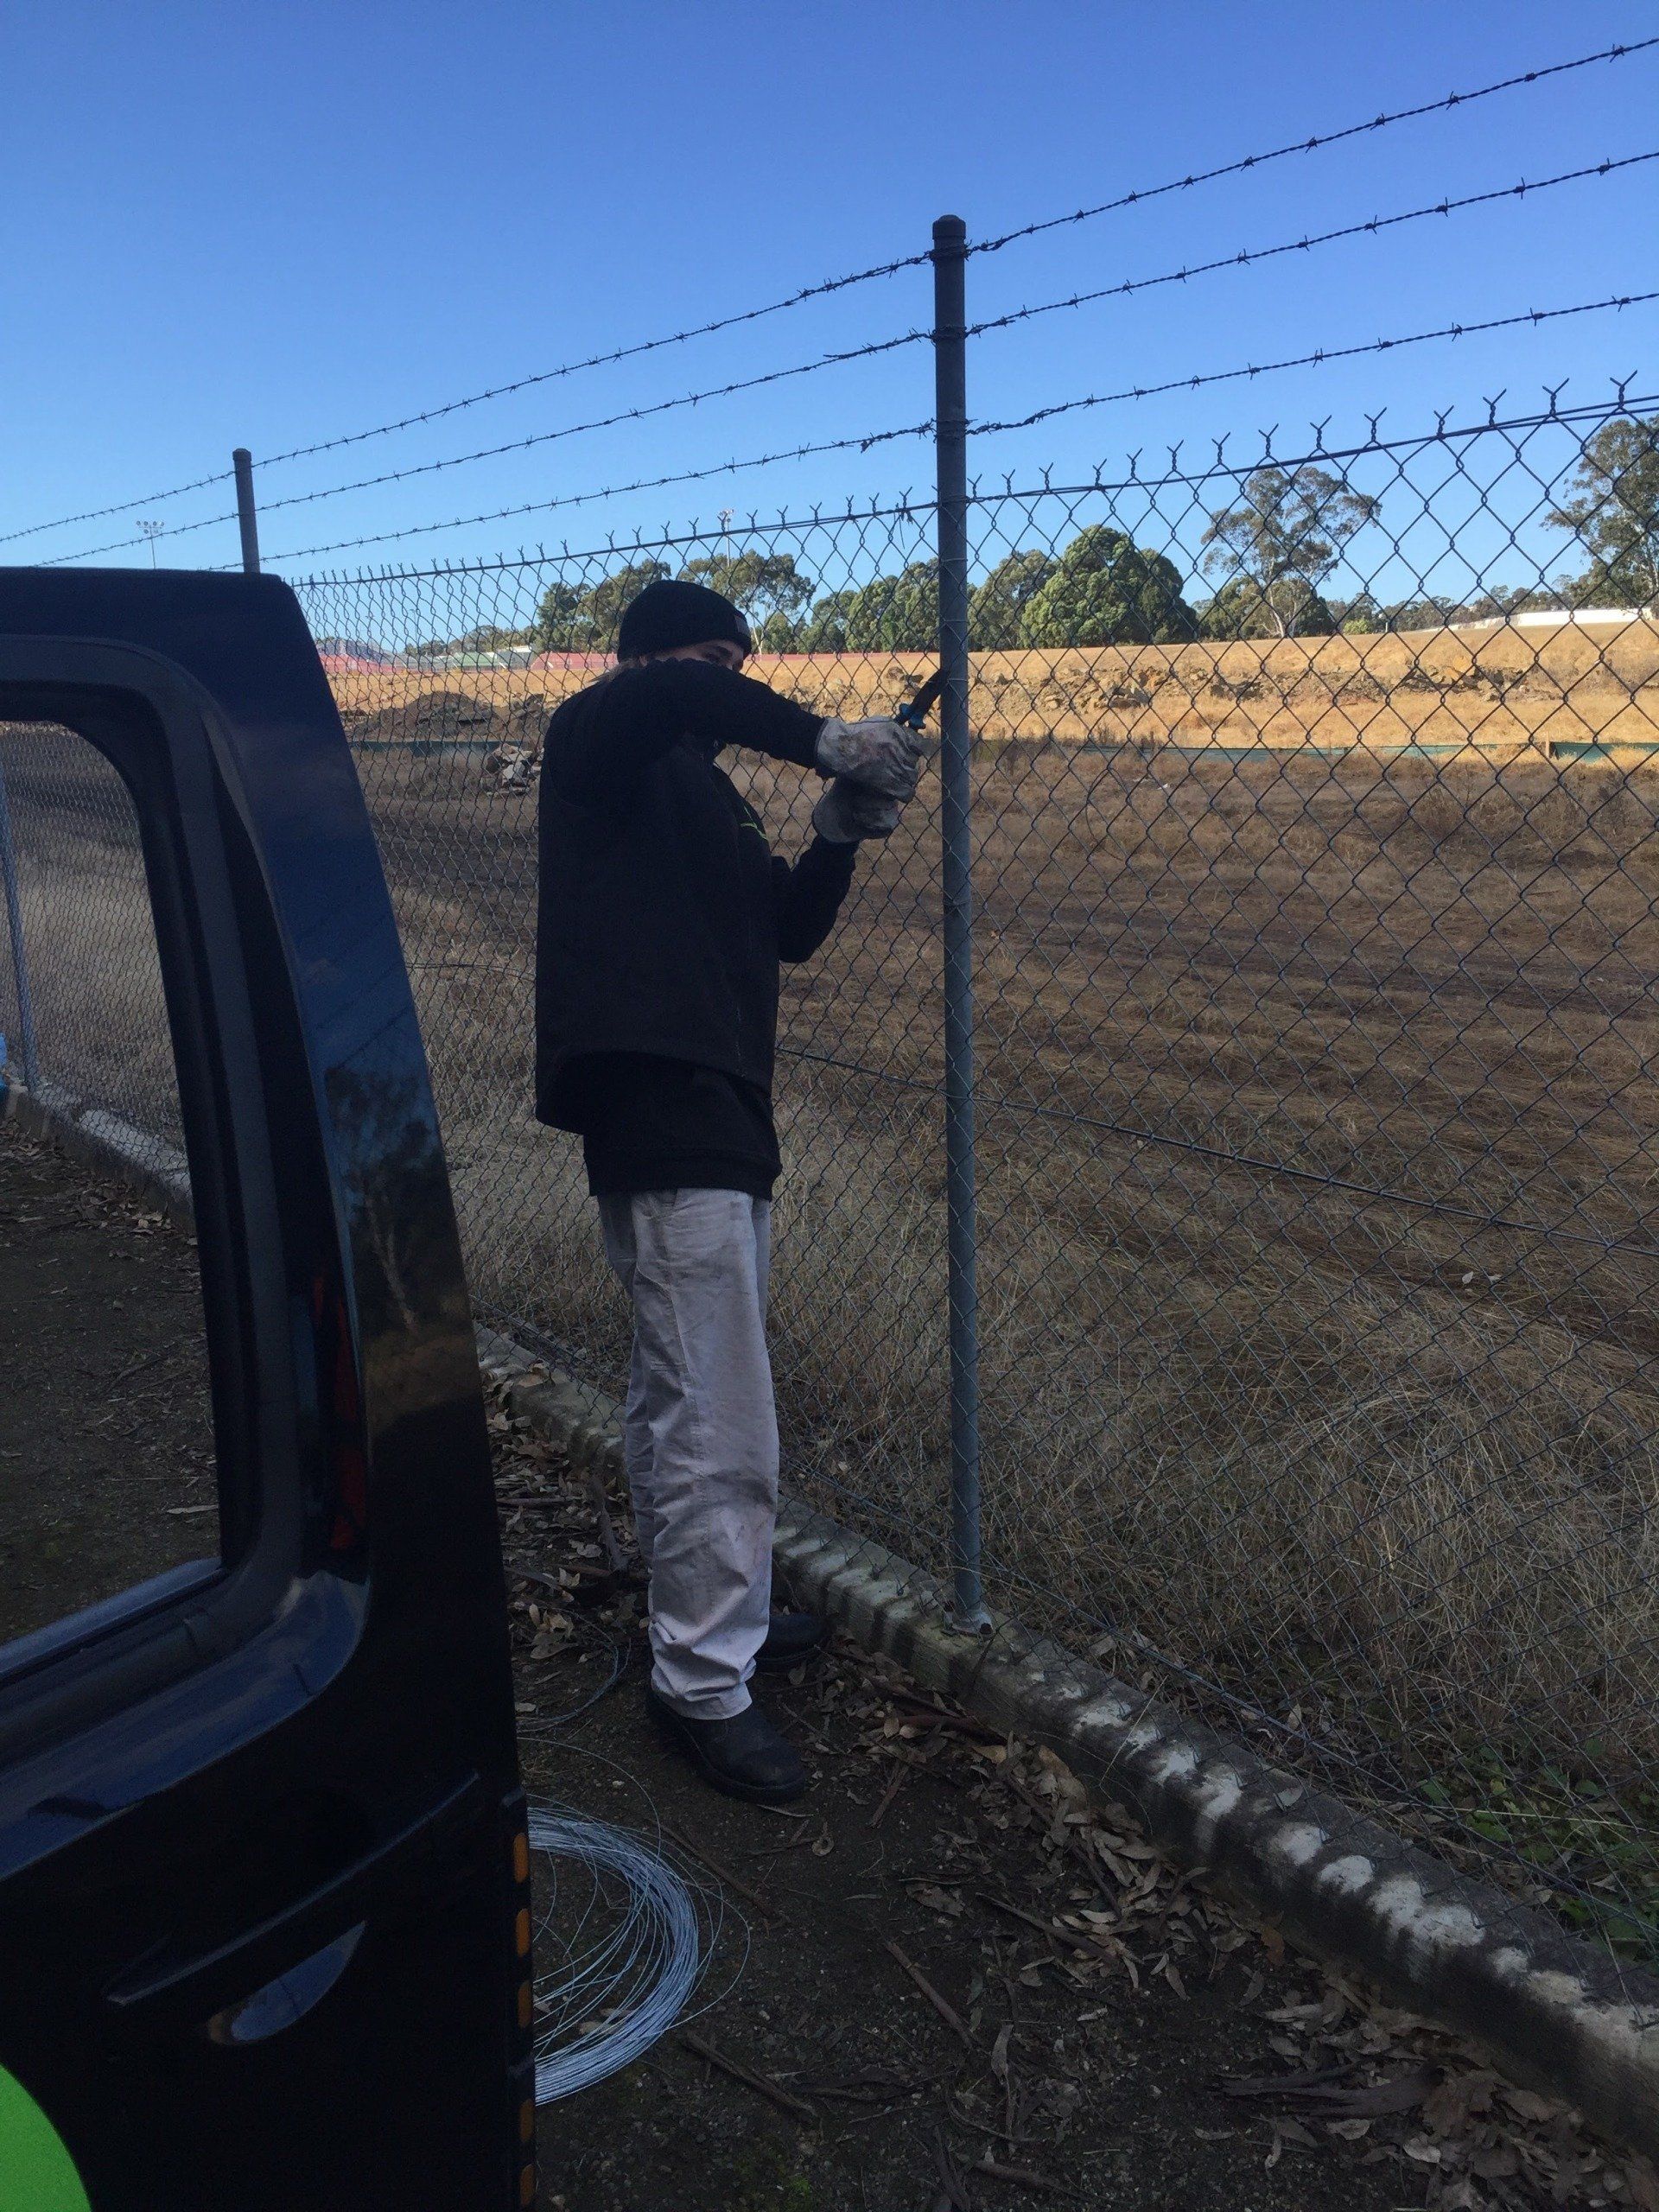 a man is working on a barbed wire fence